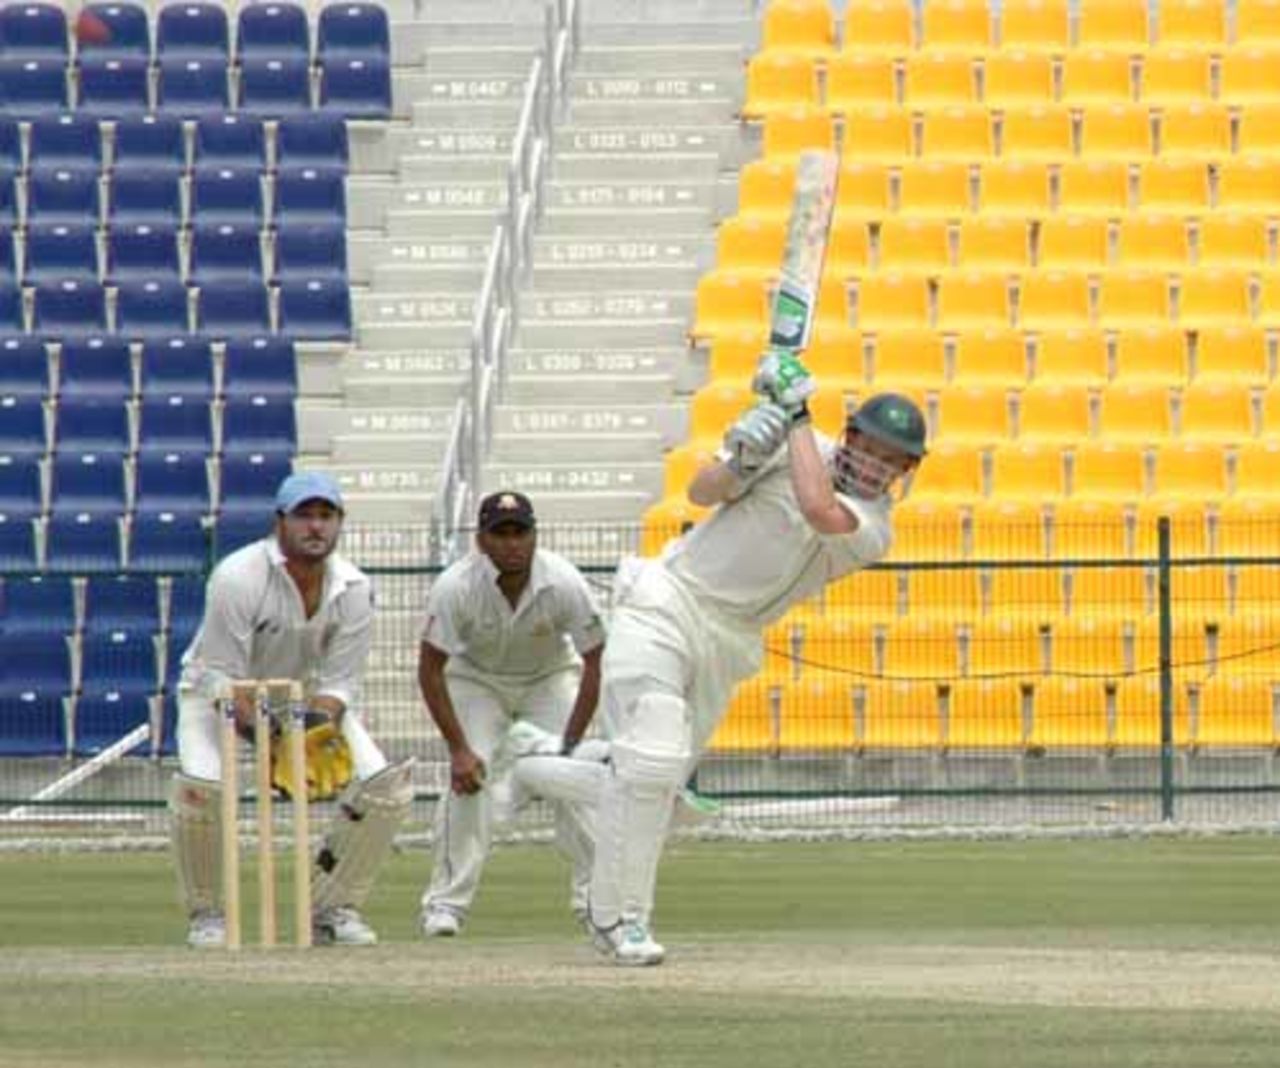 Niall O'Brien whips one over the on side during his 174, UAE v Ireland, Intercontinental Cup, 3rd day, Abu Dhabi, March 8, 2008 
